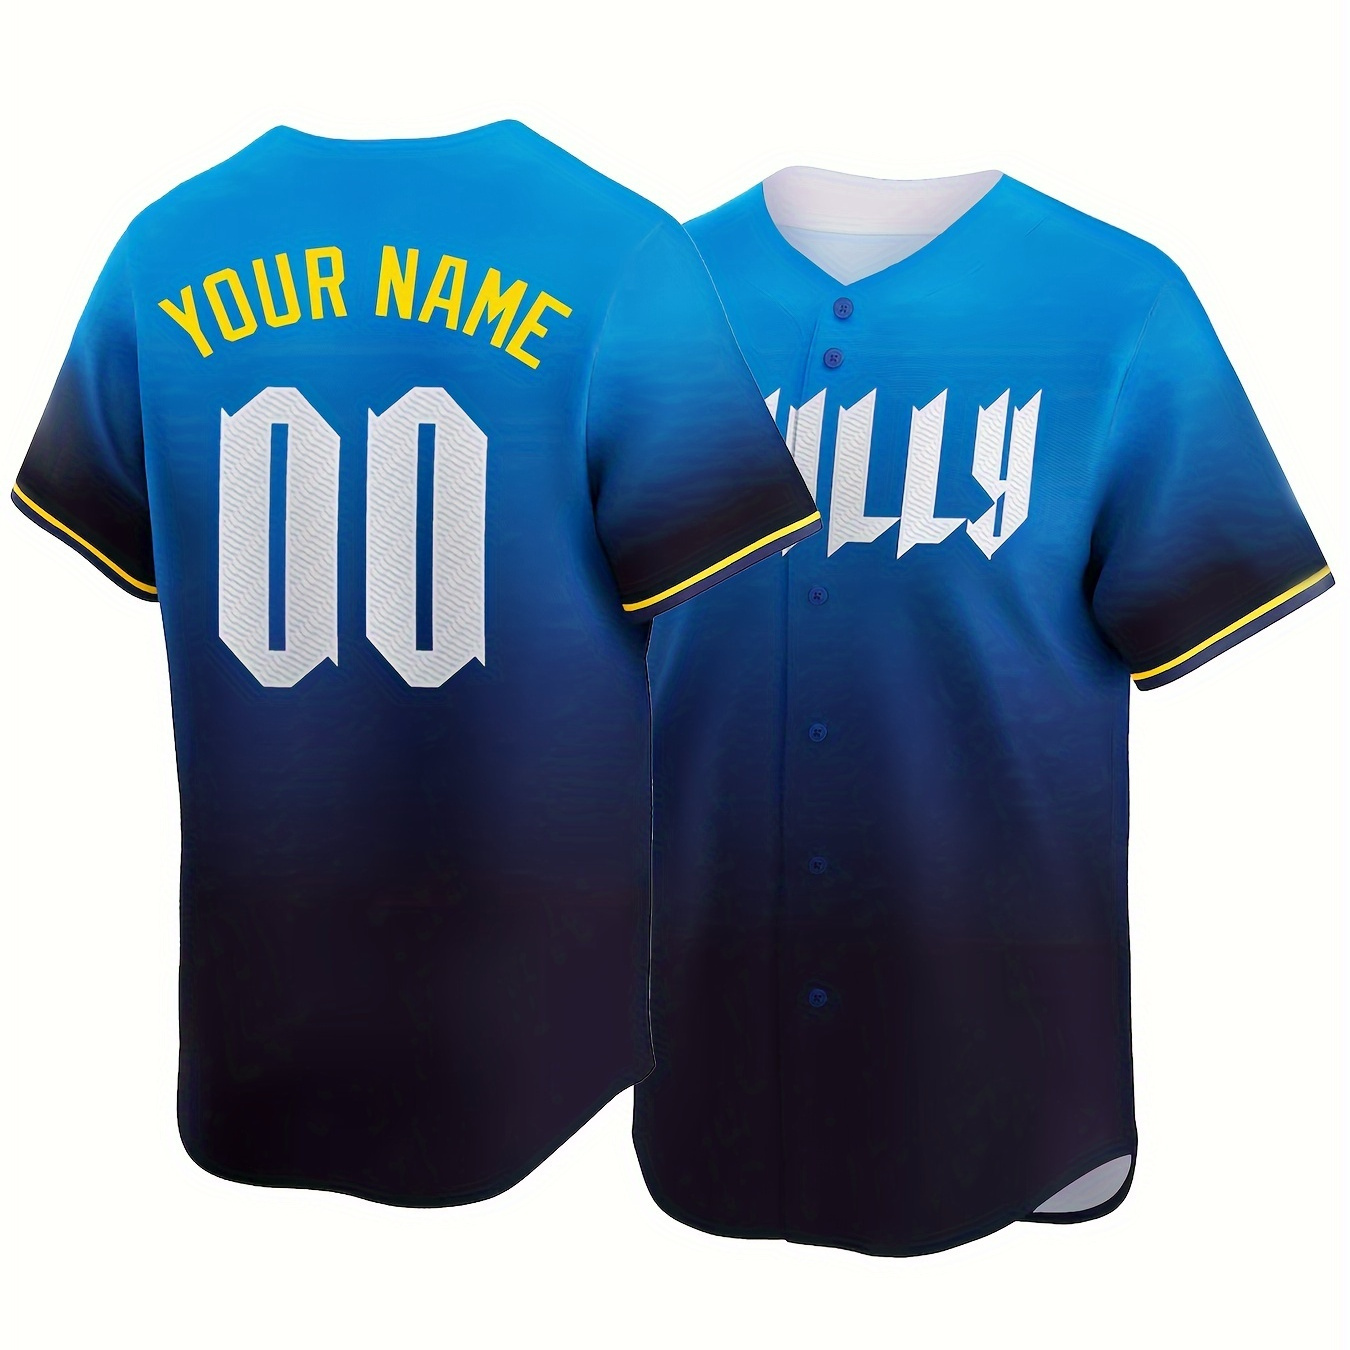 

Men's Gradient Color Baseball Jersey With Customized Name And Number, Comfy Top For Summer Sport